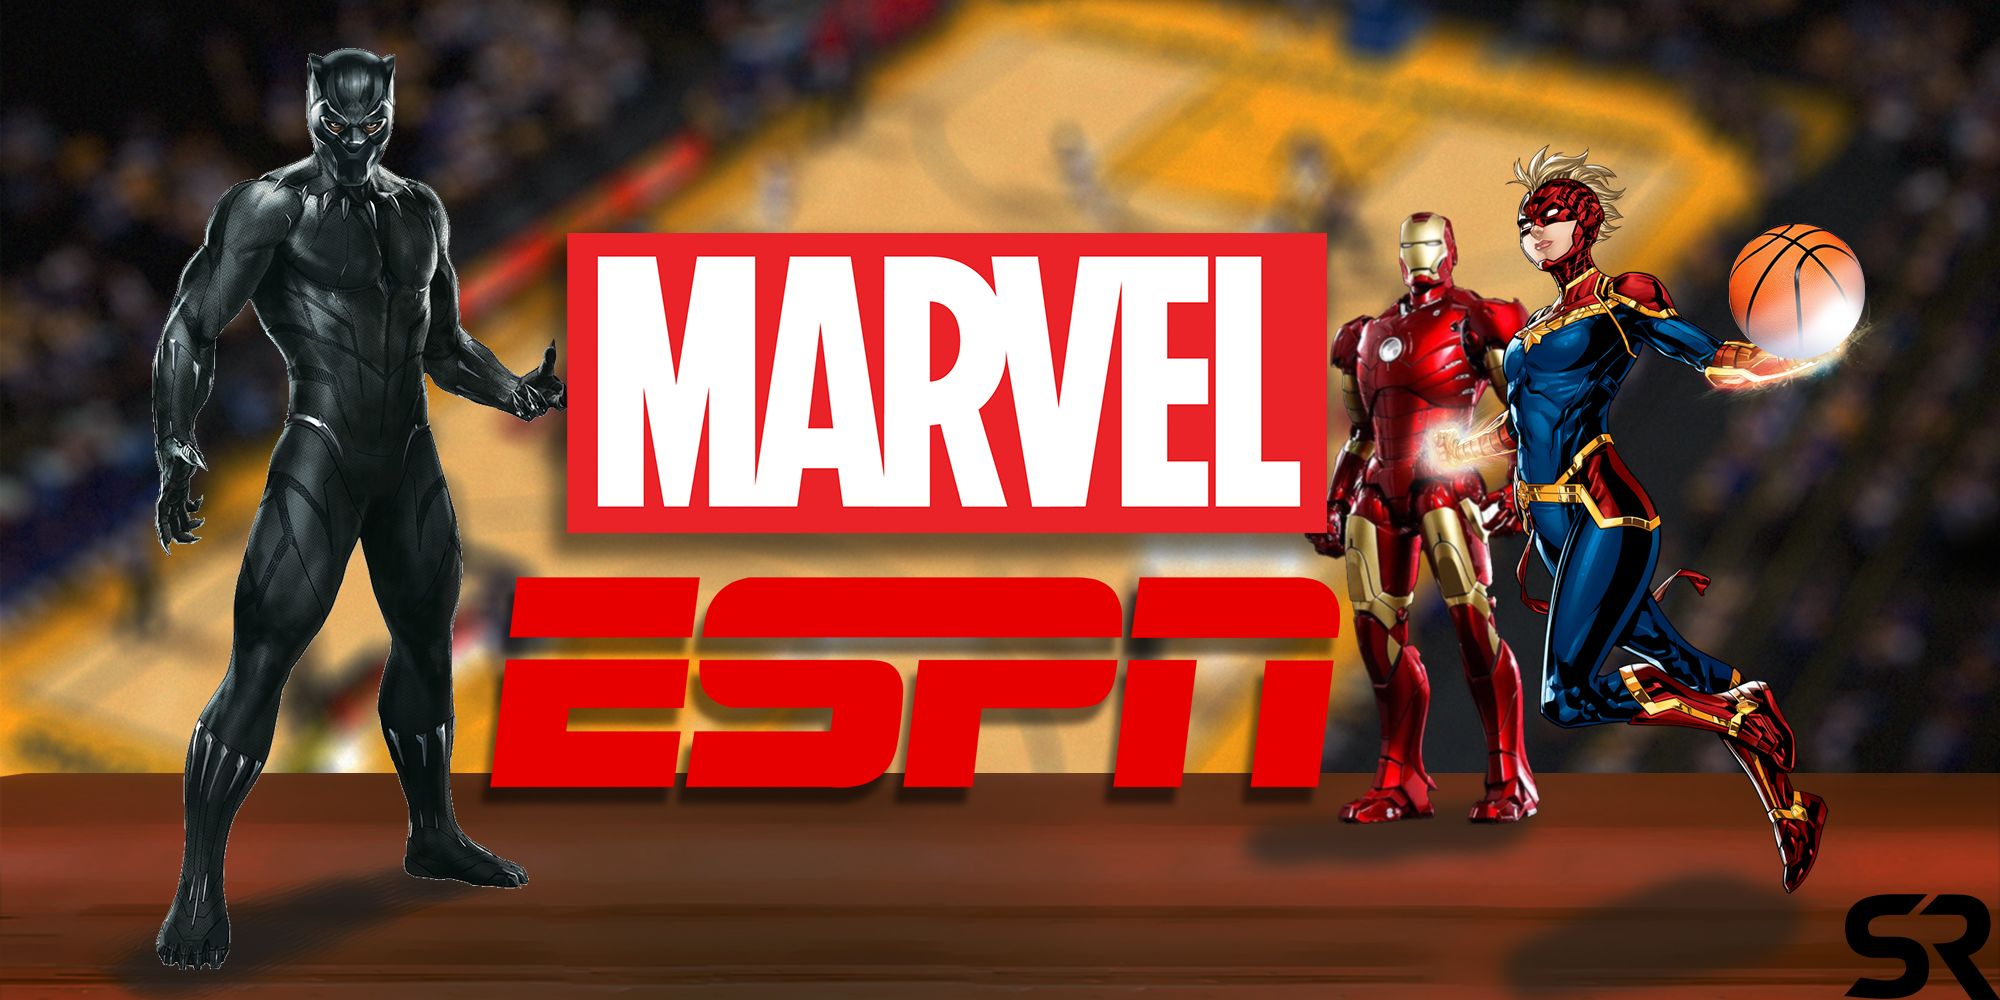 Avengers Show Up for NBA Game in Upcoming Marvel-ESPN Team Up